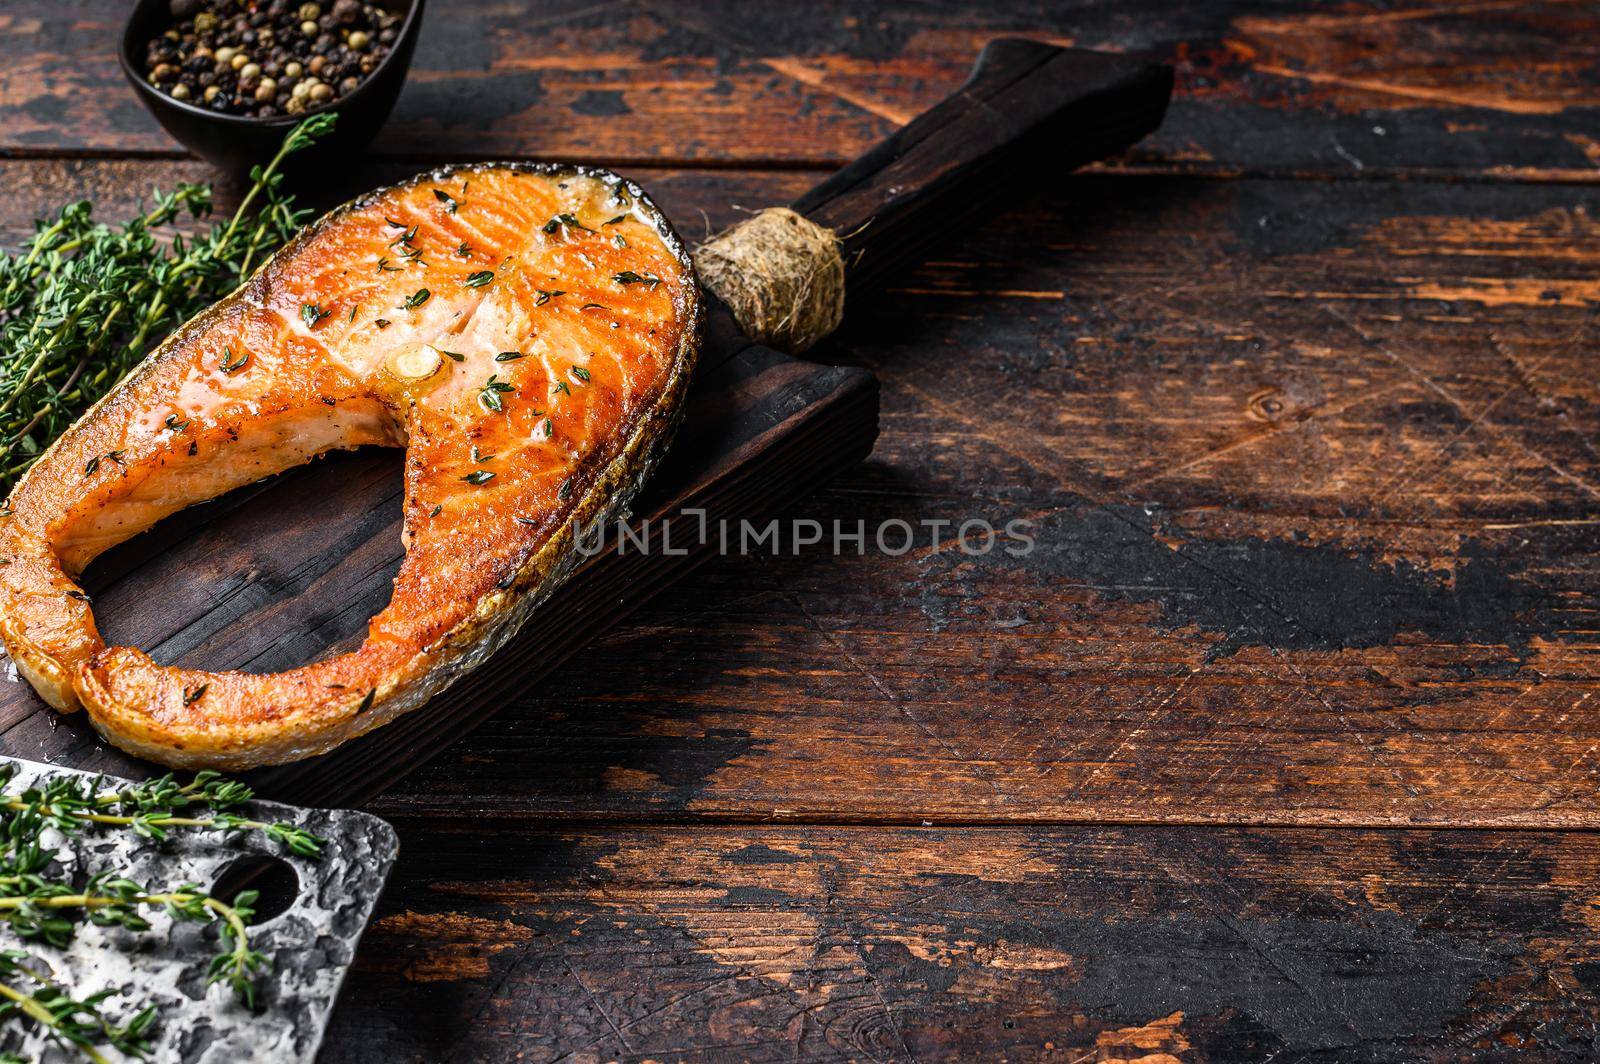 Fried trout fillet steak with pepper. Dark wooden background. Top view. Copy space by Composter